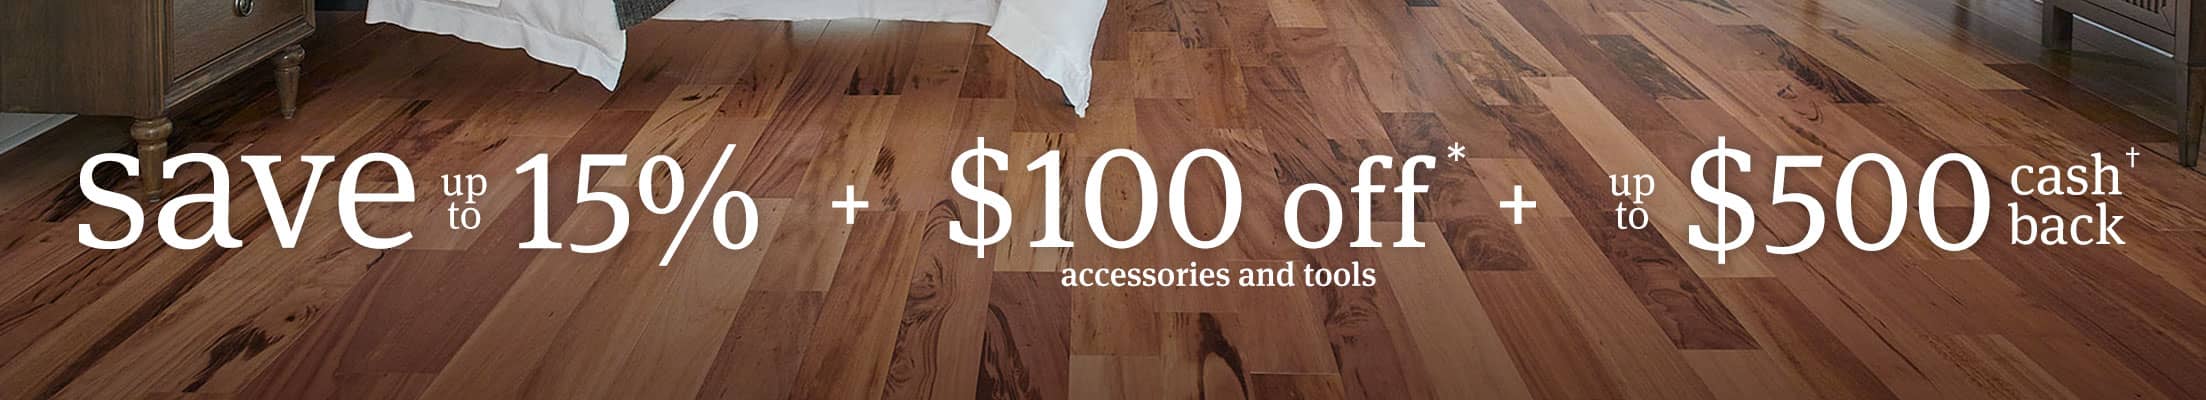 save up to 15 percent plus $100 off accessories and tools plus up to $500 cash back